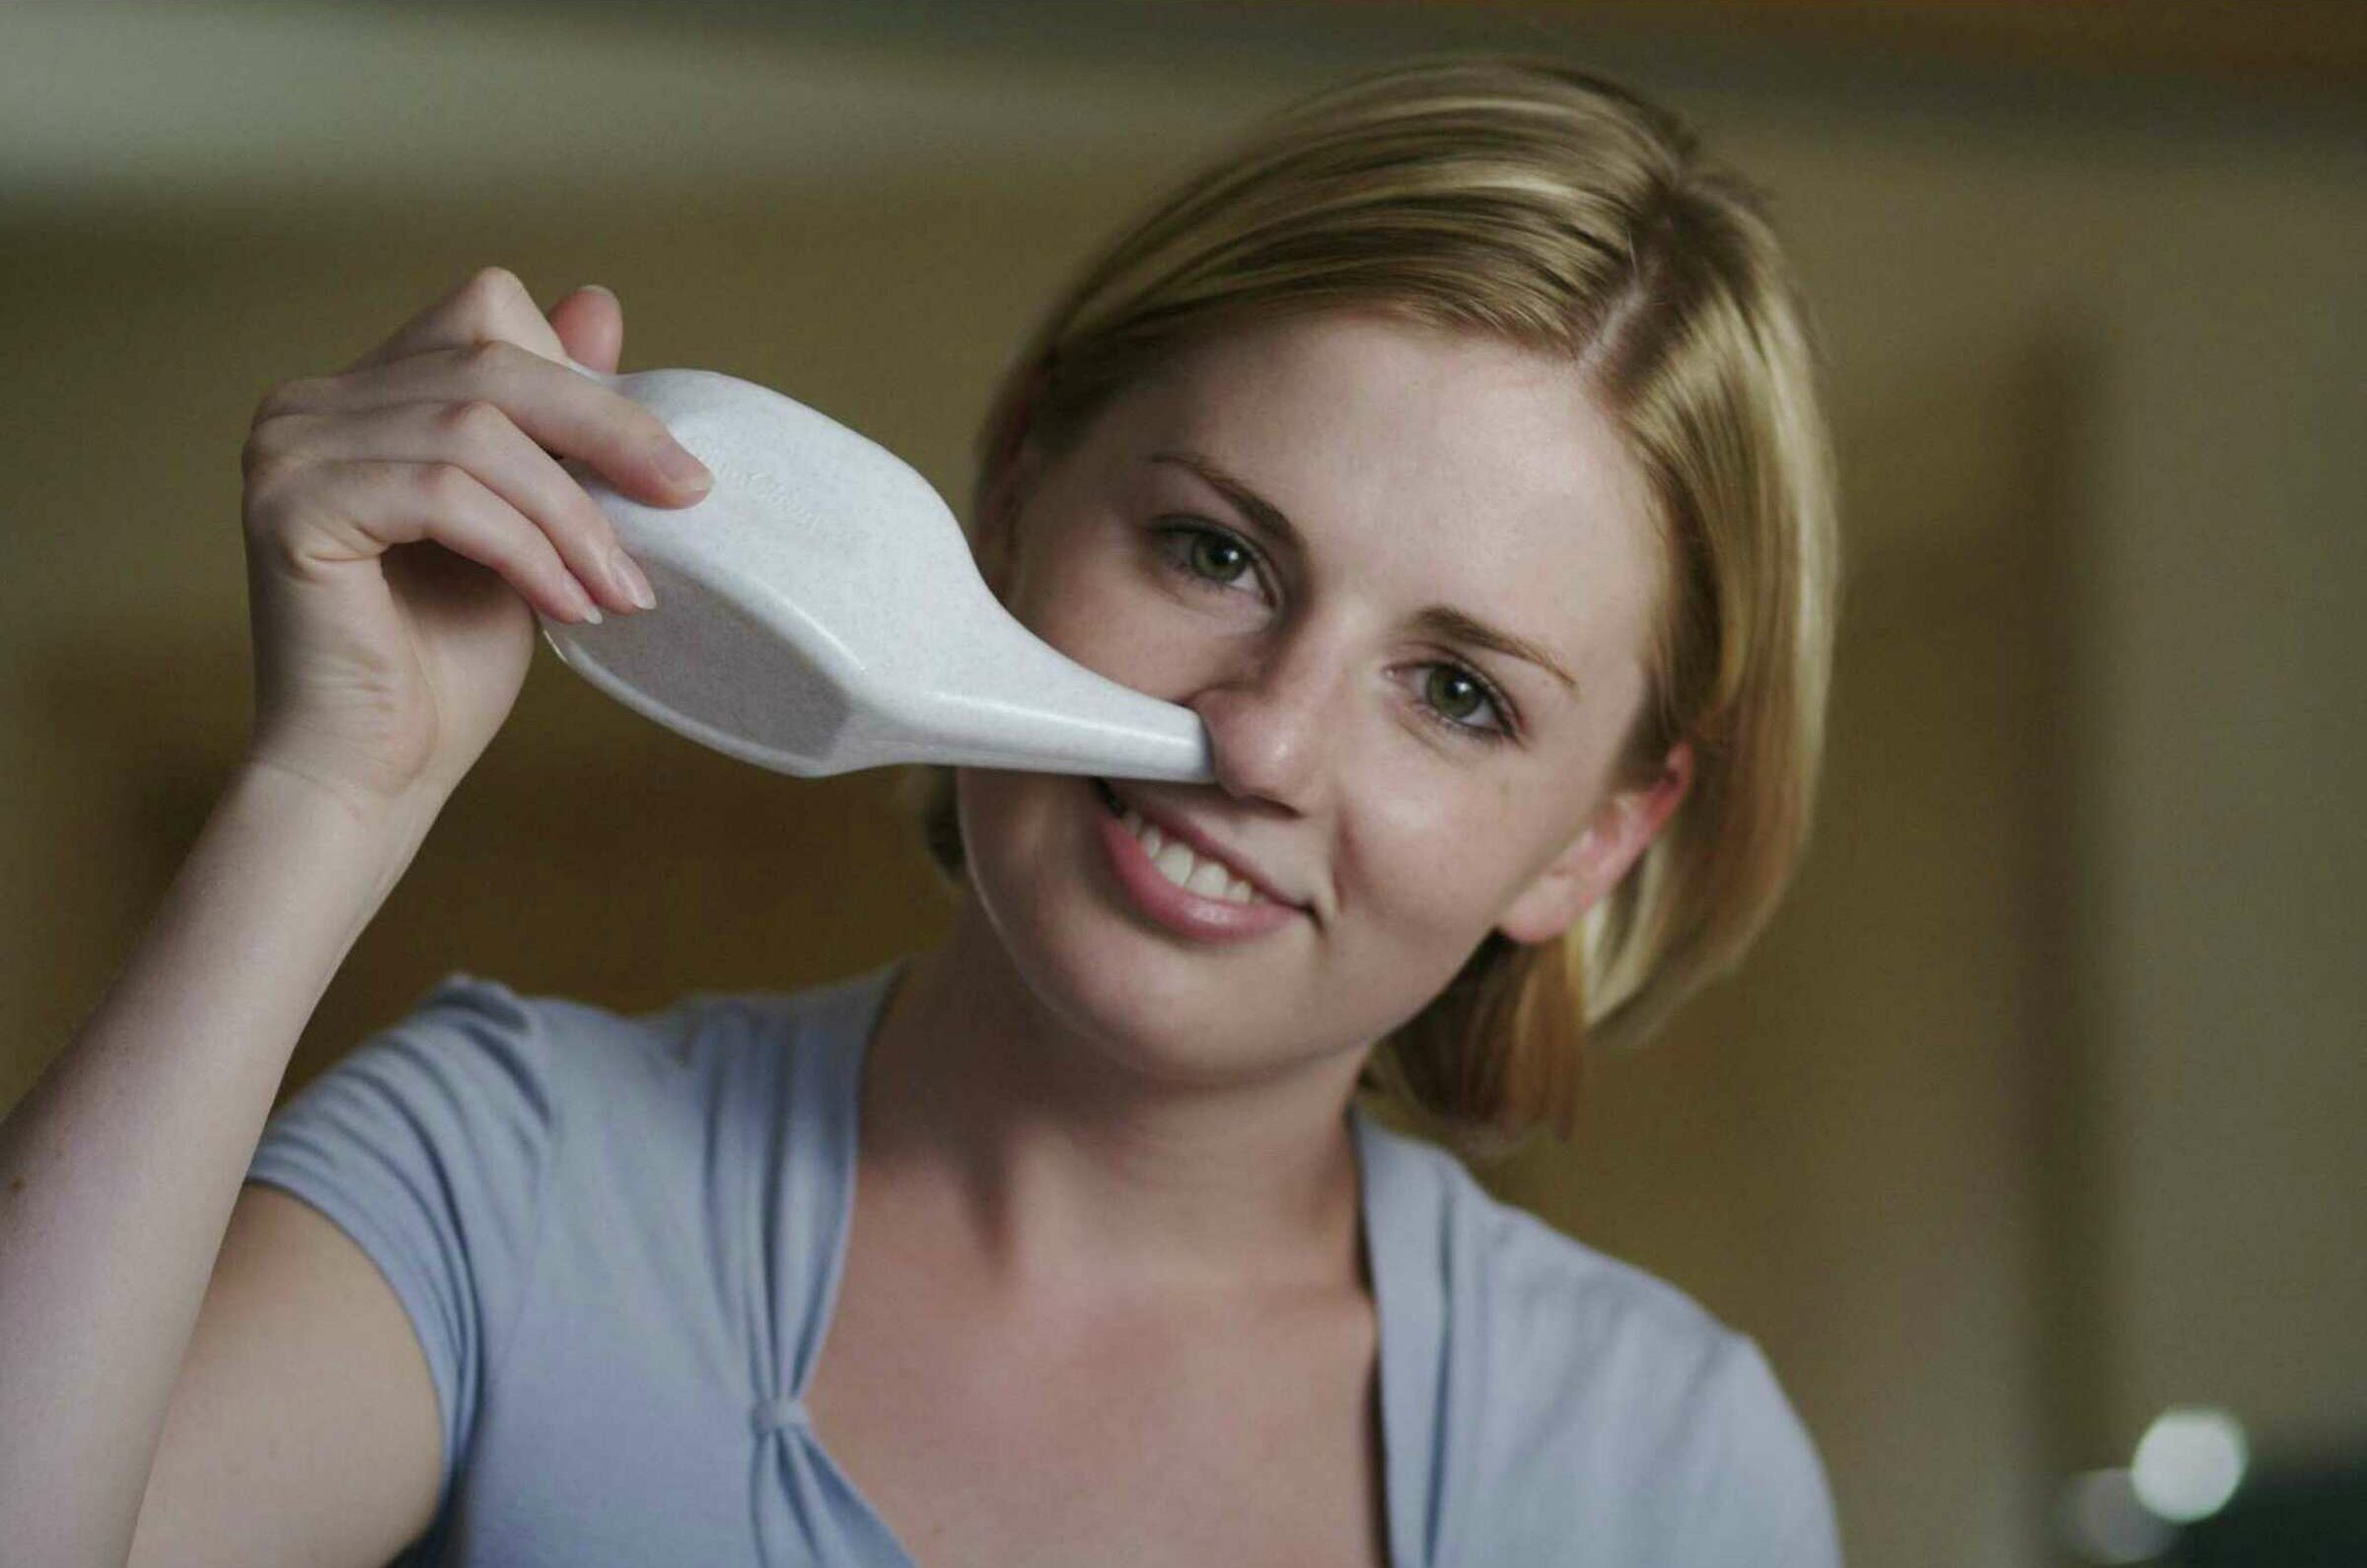 How to Use a Neti Pot: Step-by-Step Instructions